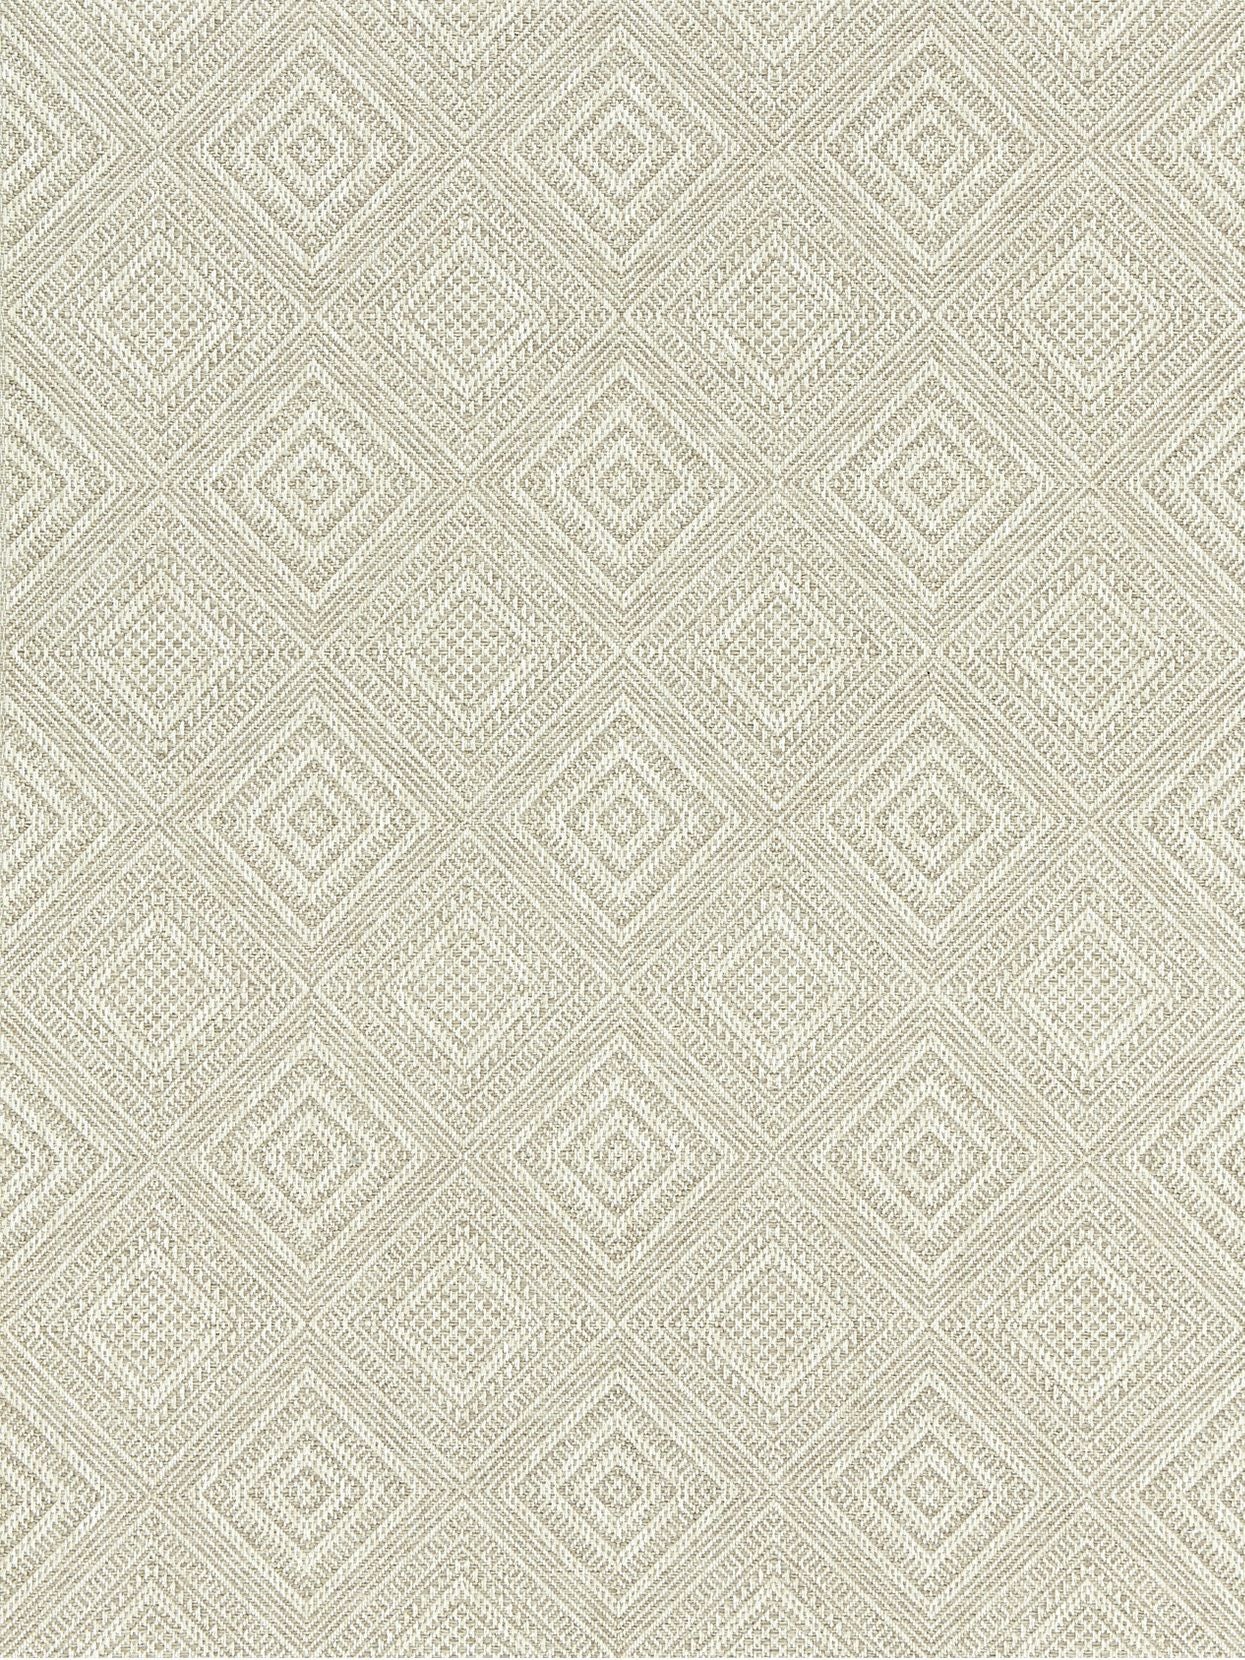 Antigua Weave fabric in linen color - pattern number SC 000227197 - by Scalamandre in the Scalamandre Fabrics Book 1 collection